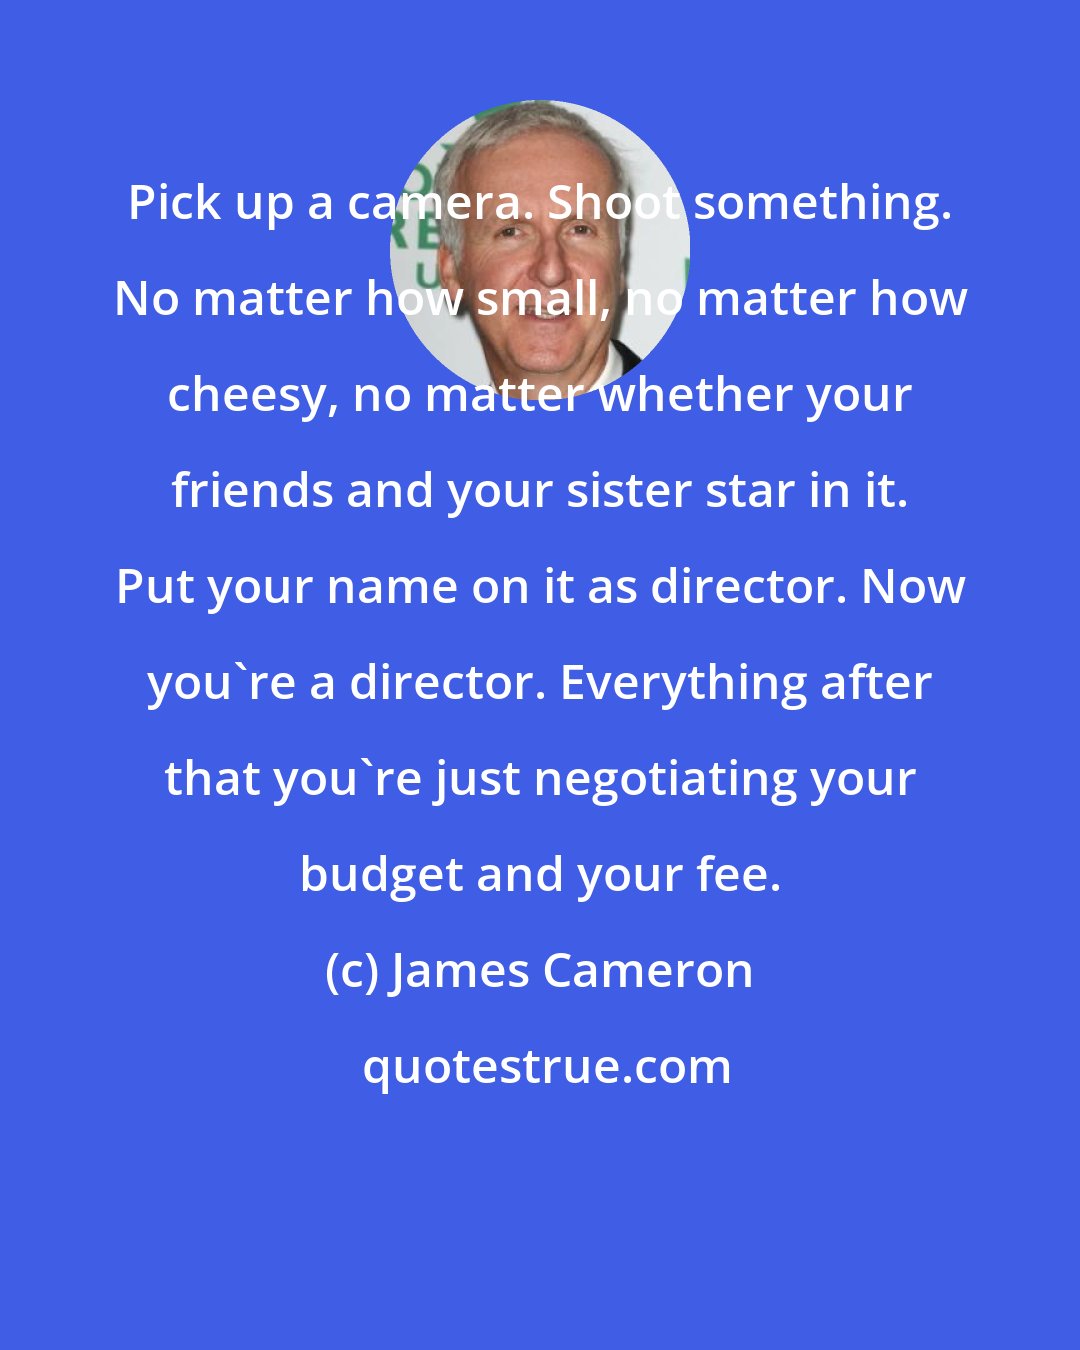 James Cameron: Pick up a camera. Shoot something. No matter how small, no matter how cheesy, no matter whether your friends and your sister star in it. Put your name on it as director. Now you're a director. Everything after that you're just negotiating your budget and your fee.